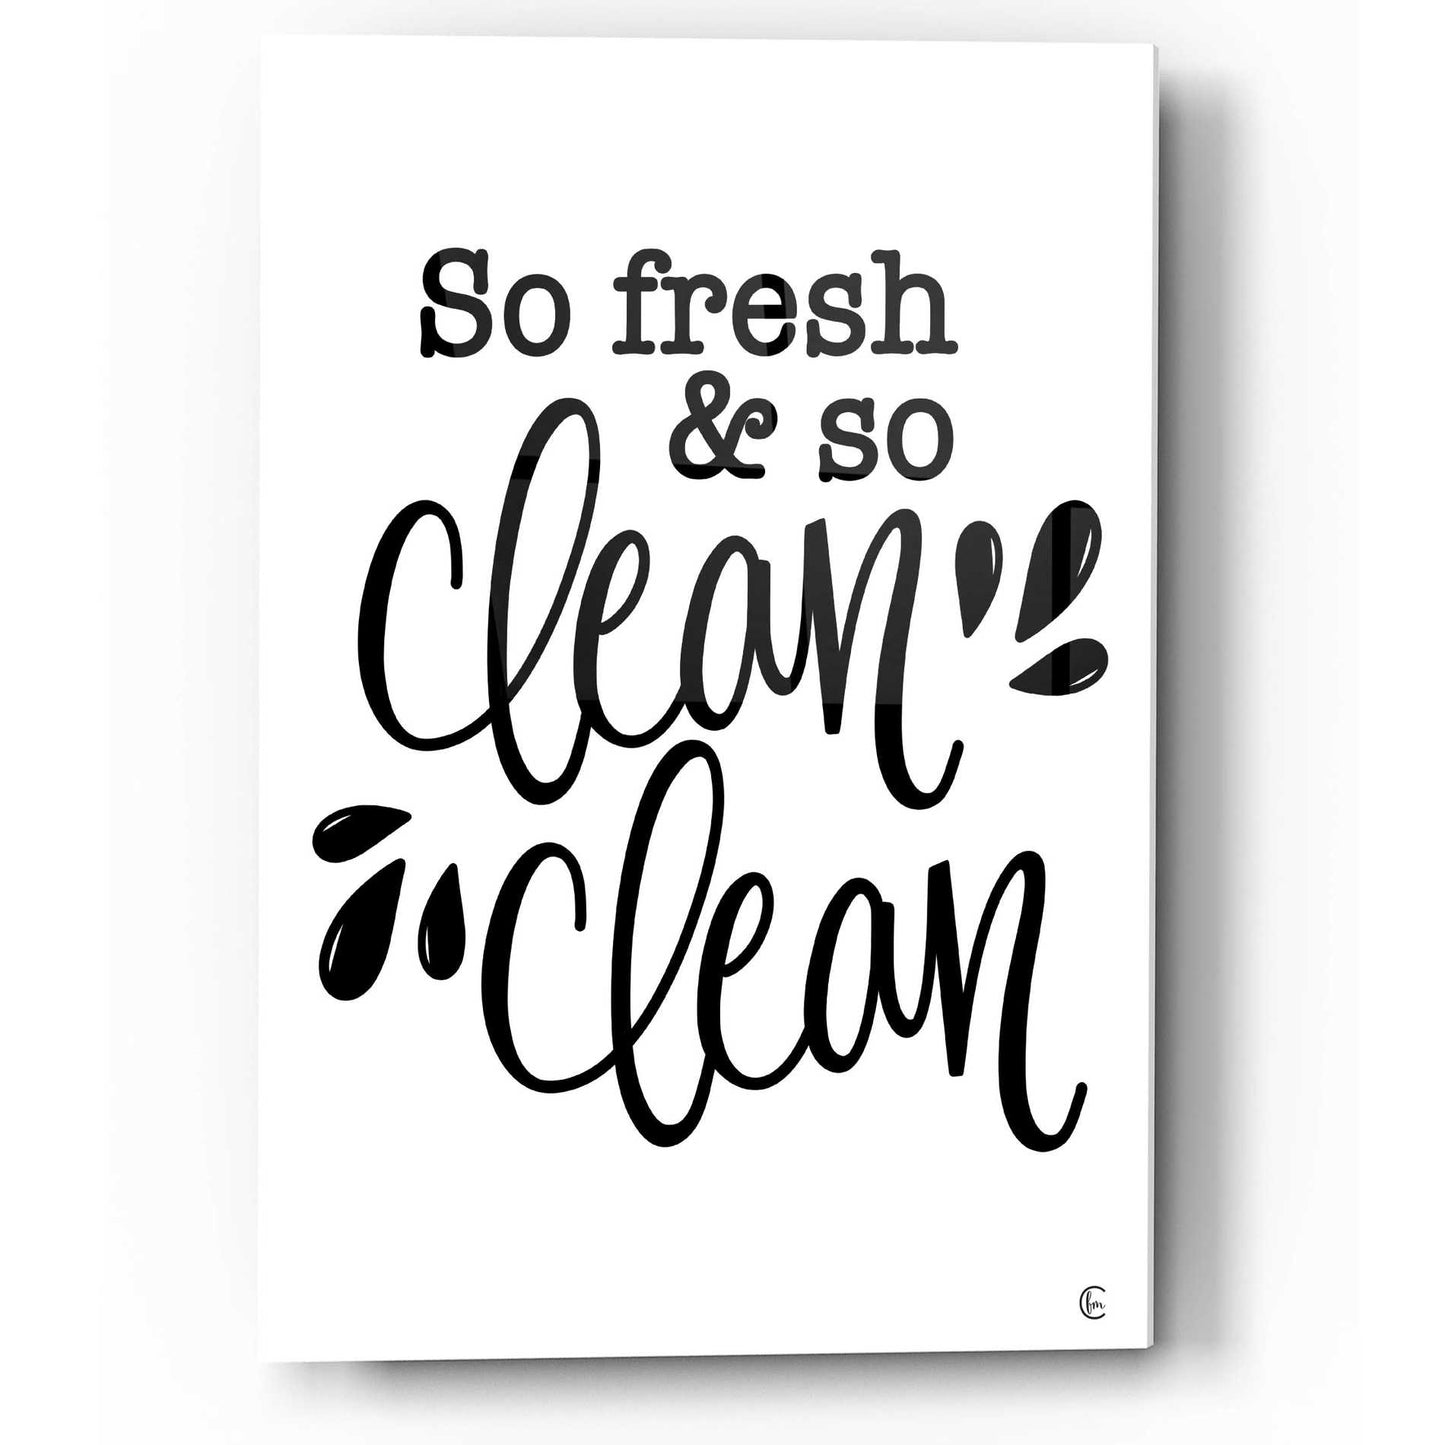 Epic Art 'So Clean Clean' by Fearfully Made Creations, Acrylic Glass Wall Art,12x16